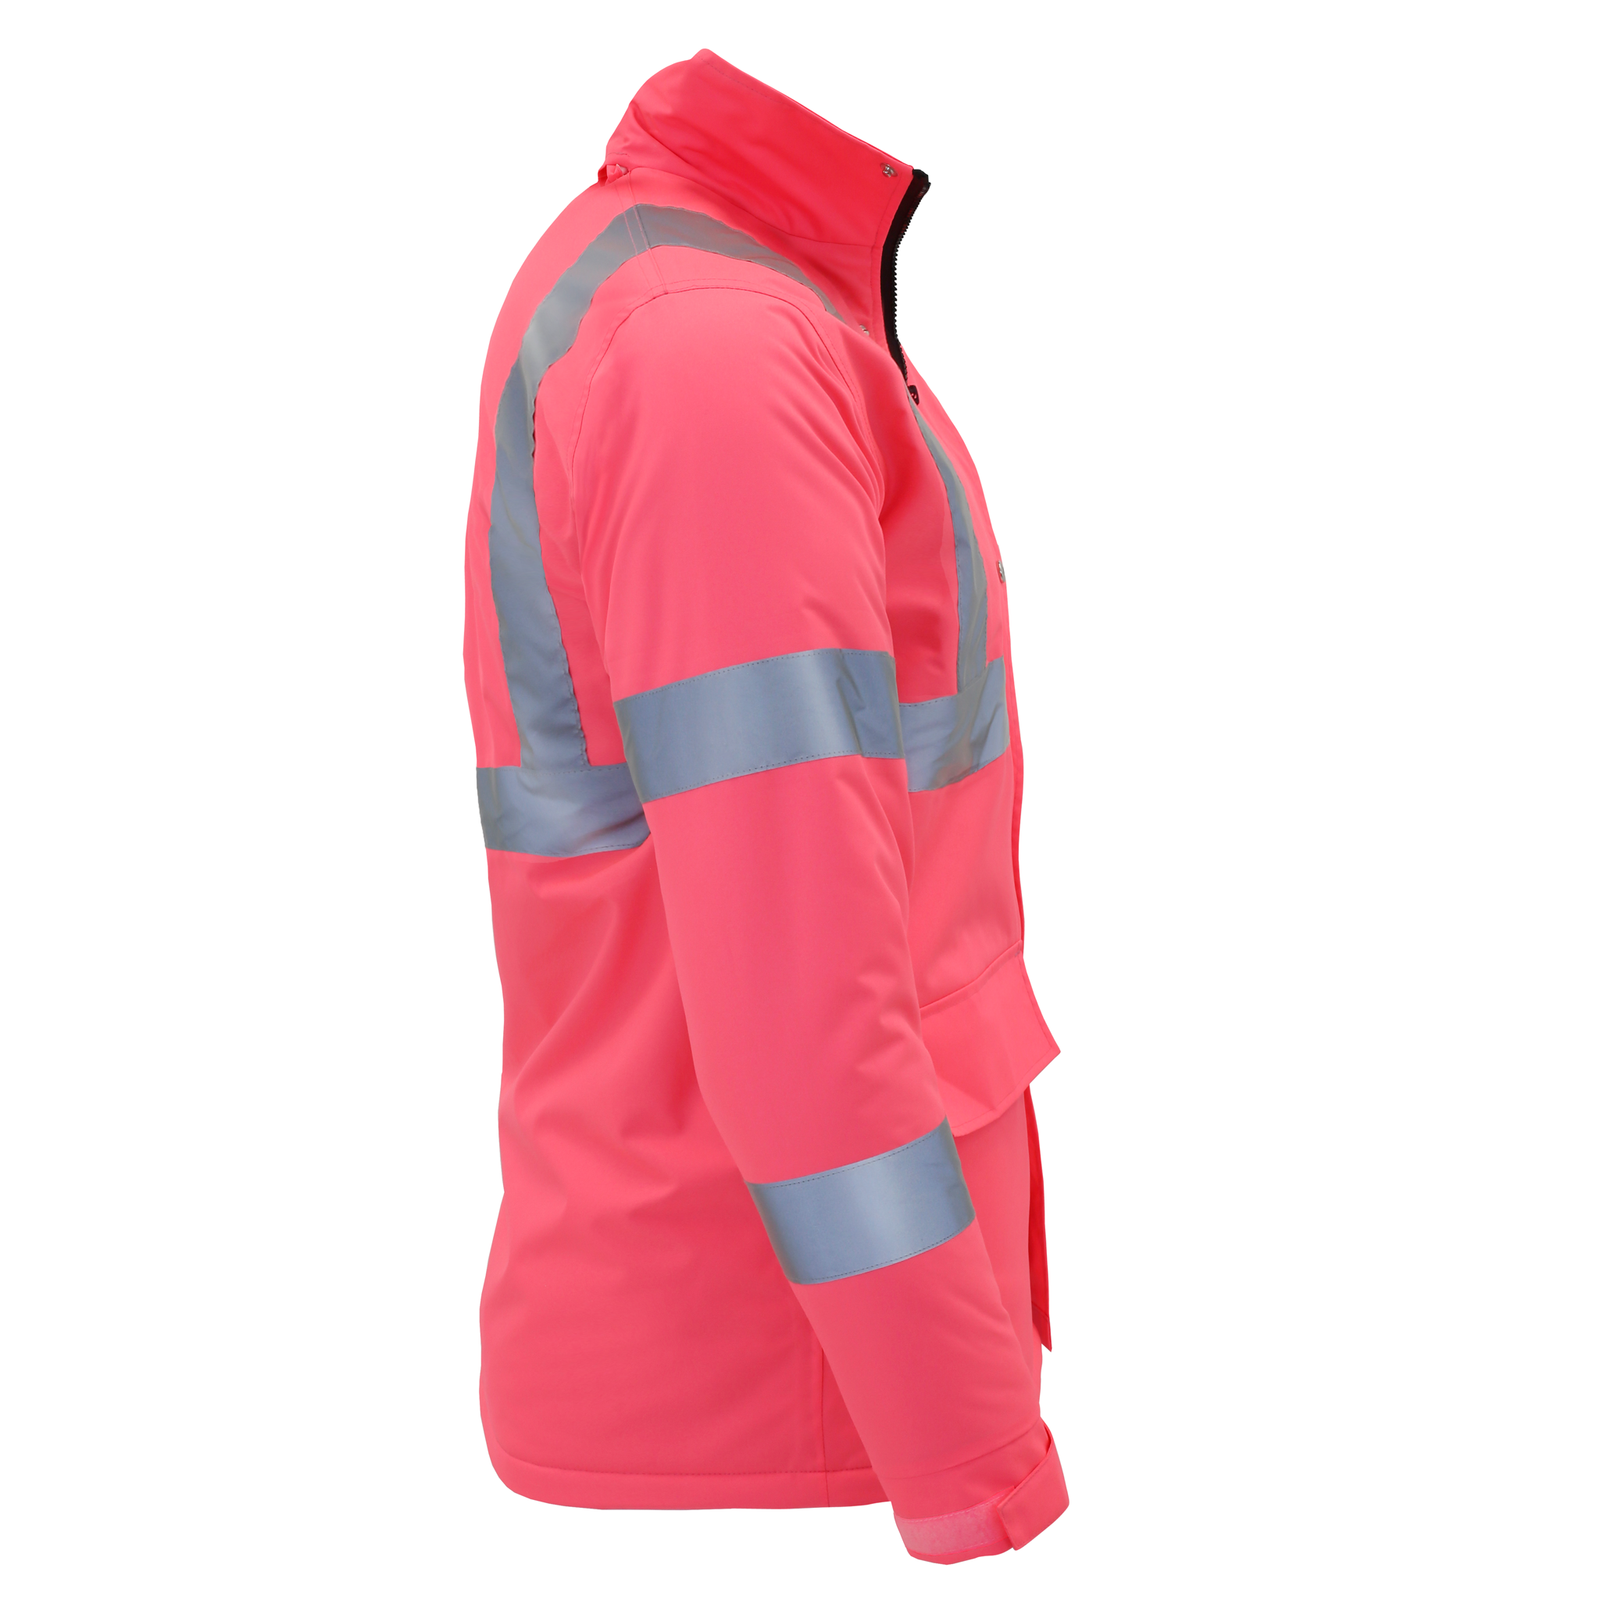 Jorestech hi-vis safety jacket with reflective strips, hideaway hoodie and pockets